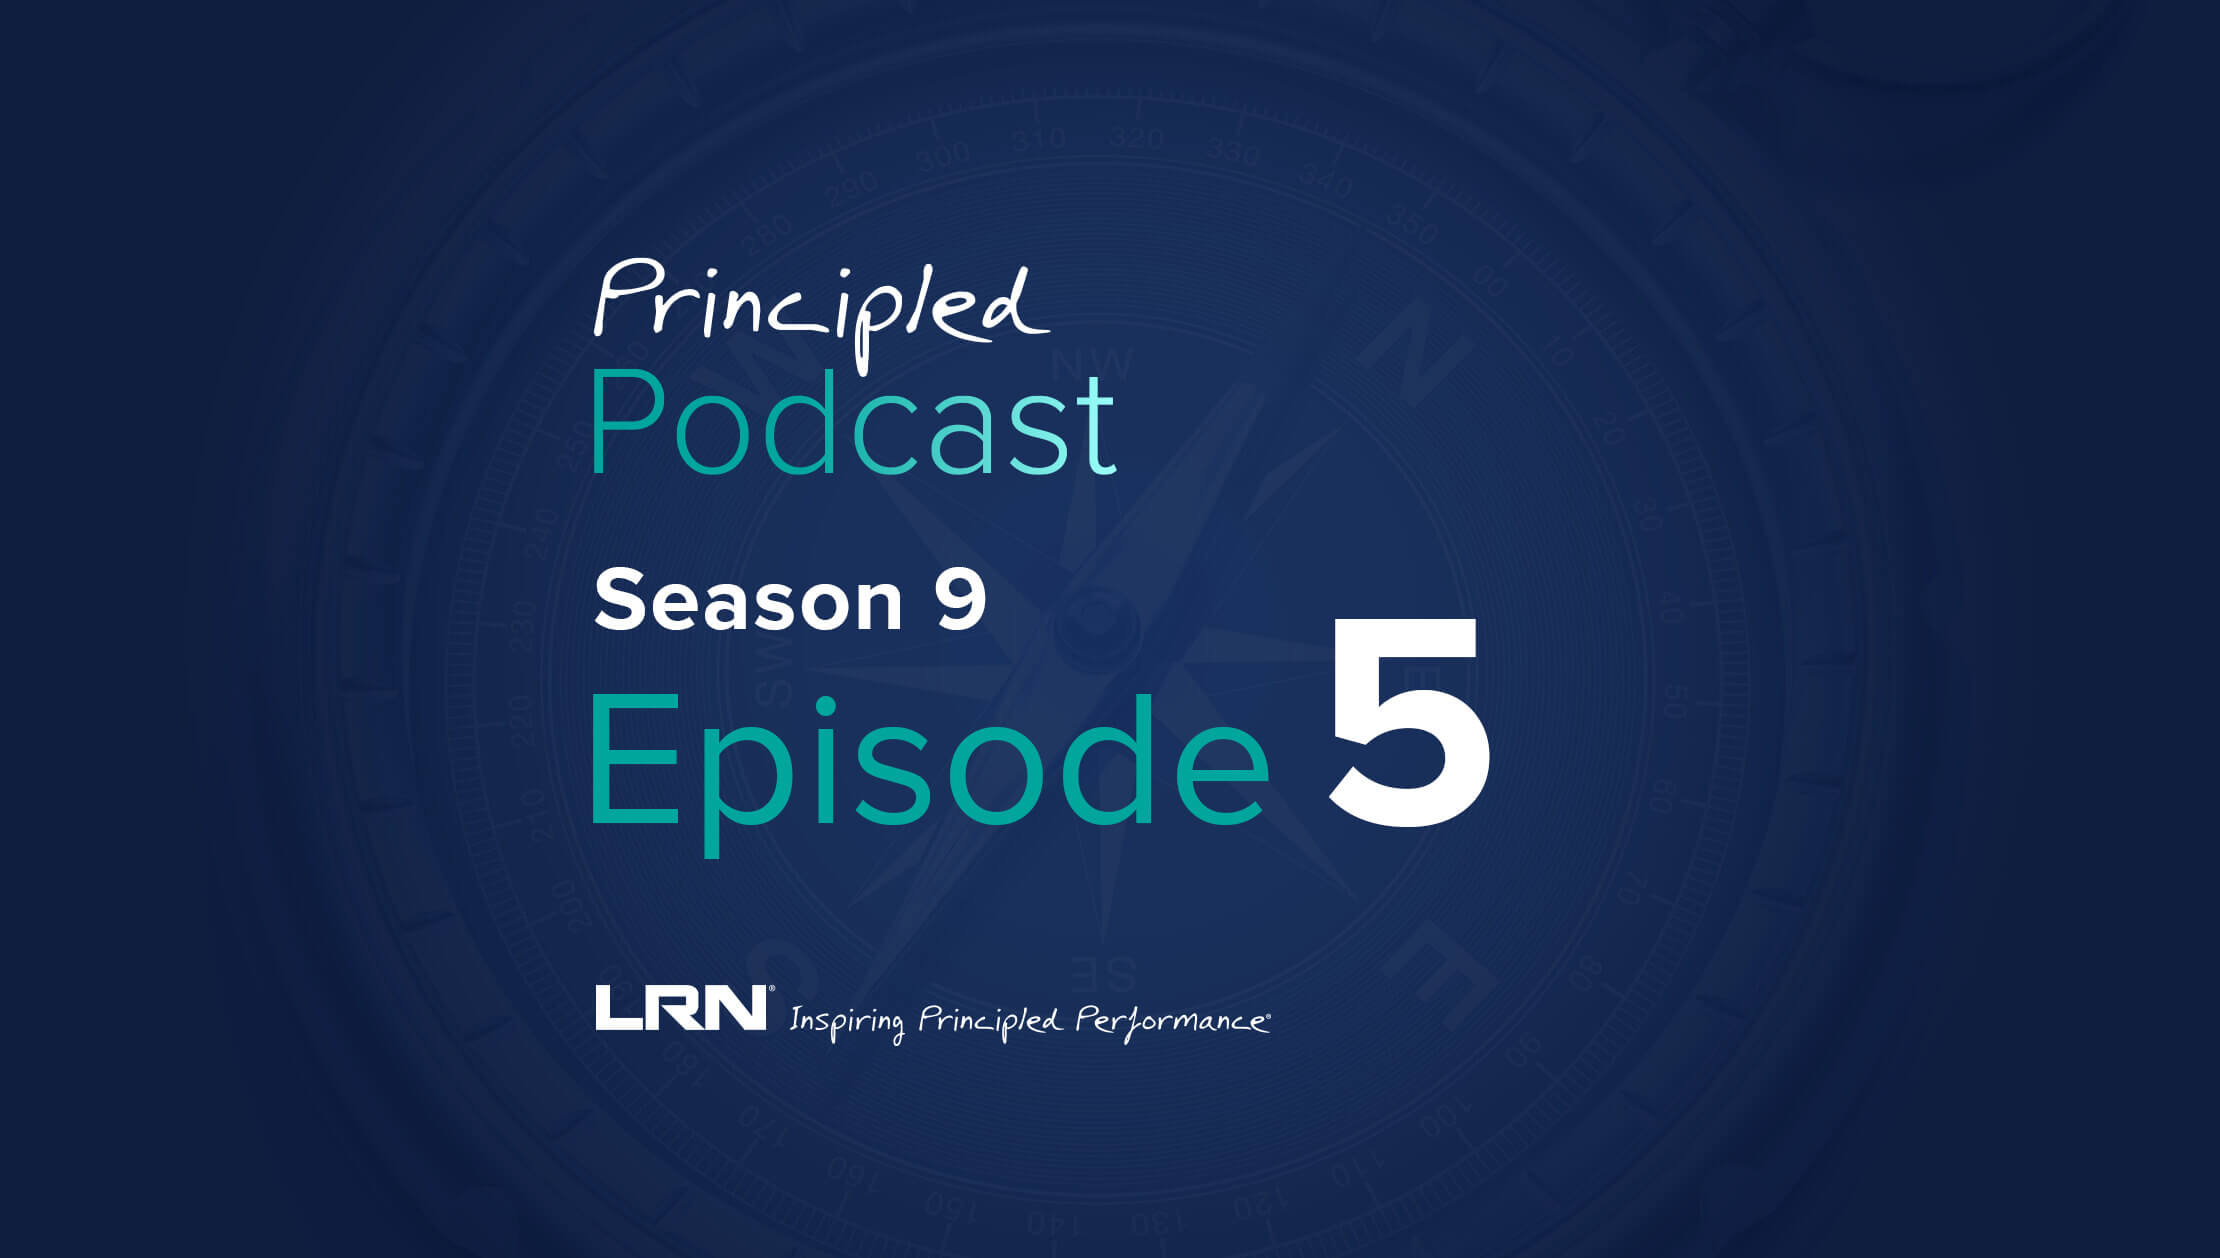 LRN Principled Podcast Season 9 Episode 5 – How company principles and values make compliance simple